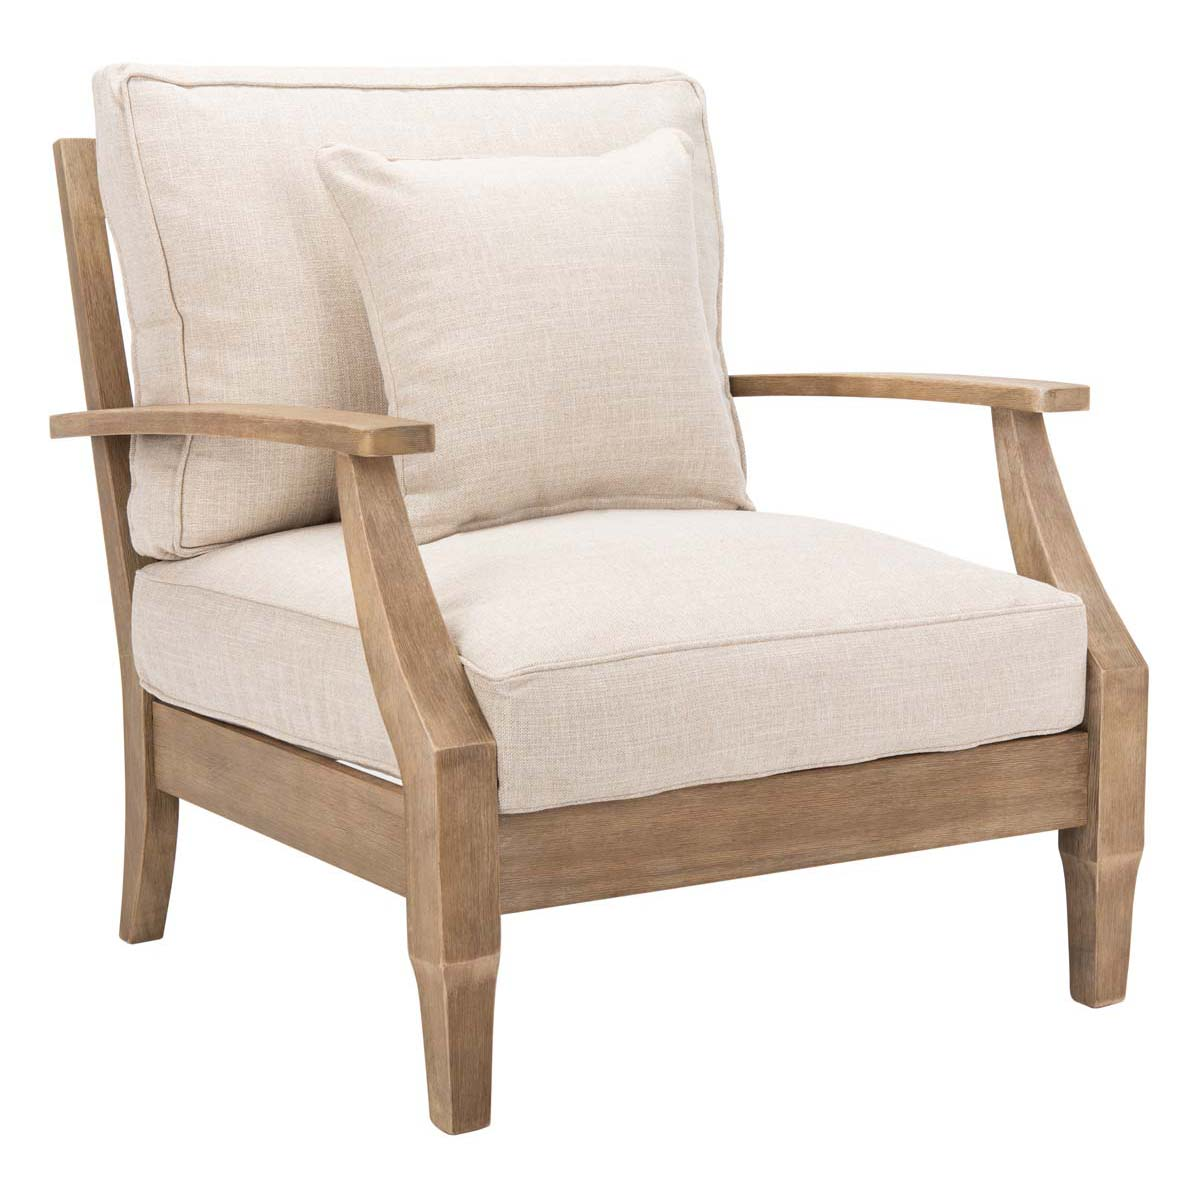 Safavieh Couture Martinique Wood Patio Armchair - Natural / White